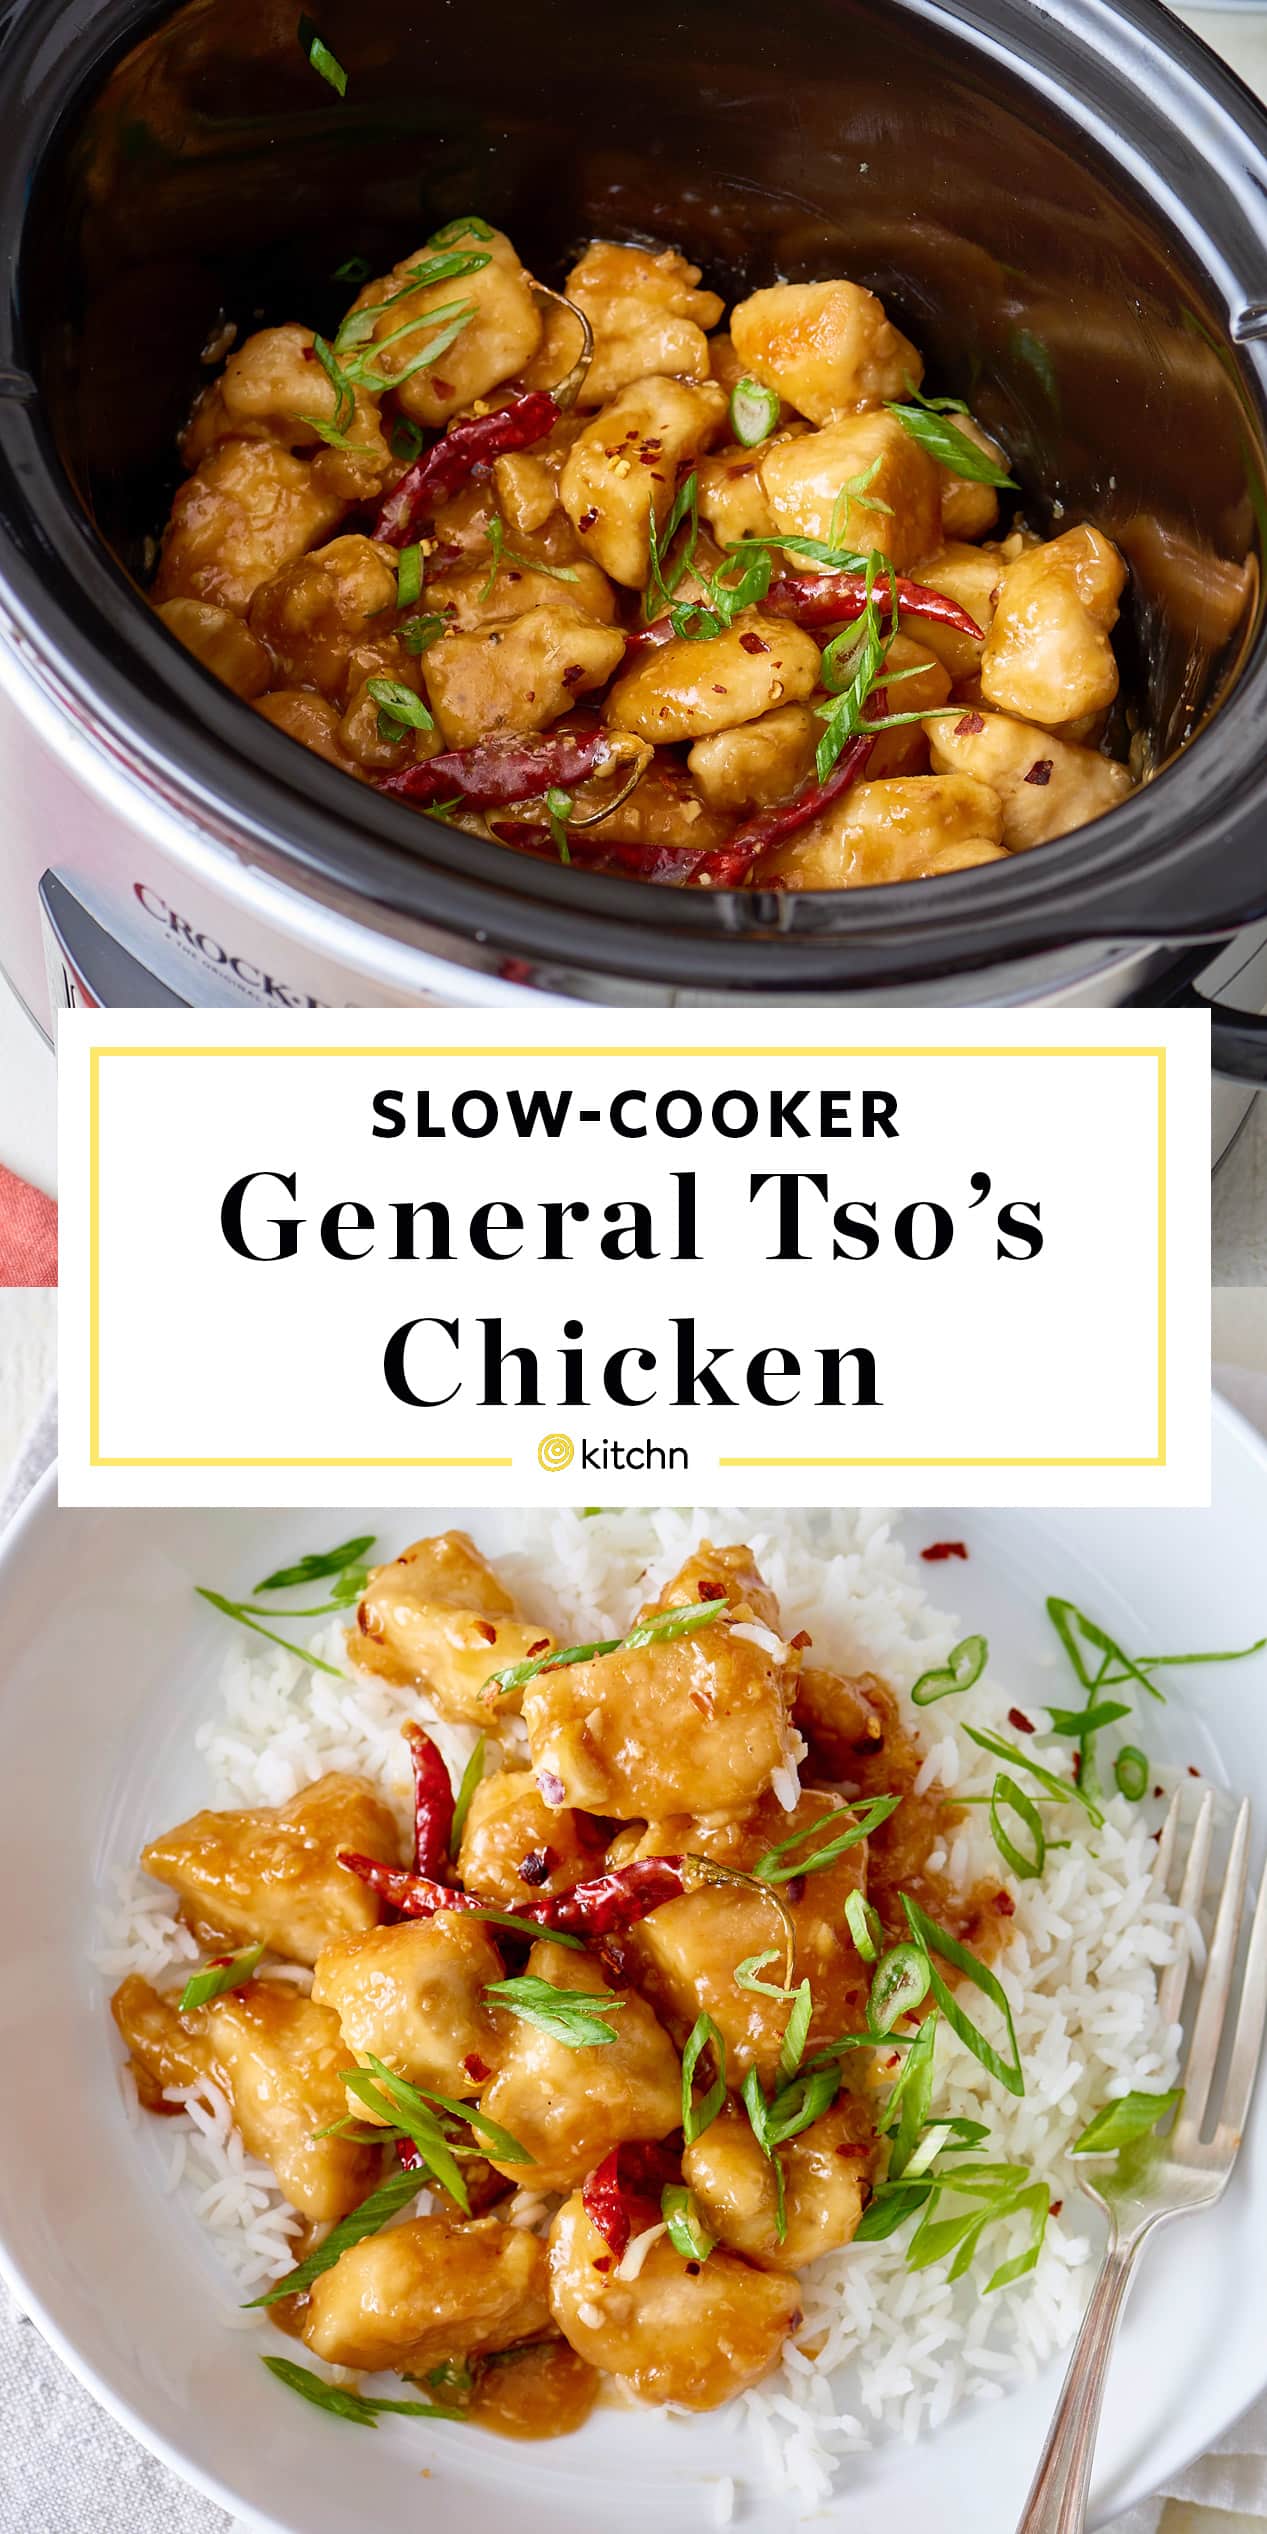 How To Make Slow Cooker General Tso's Chicken | Kitchn